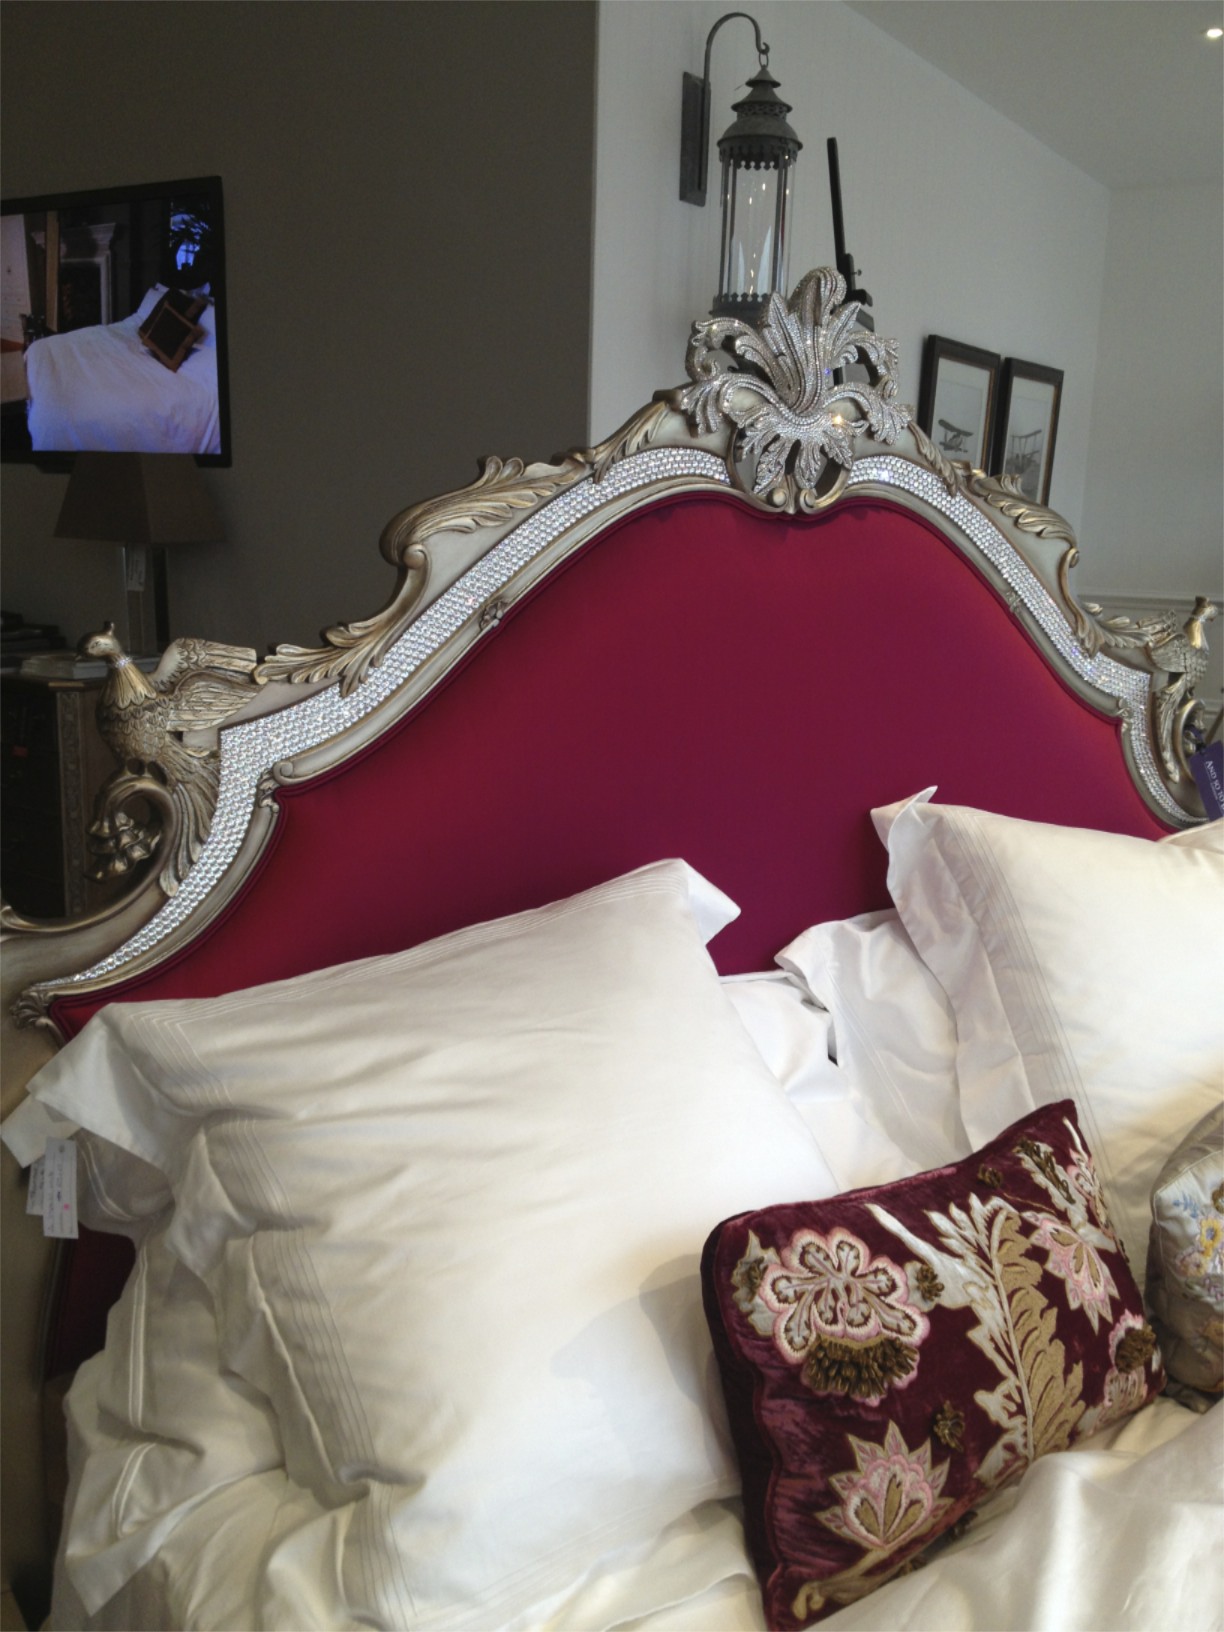 I saw a bed that cost £30,000. Rhianna has one, of course she does.